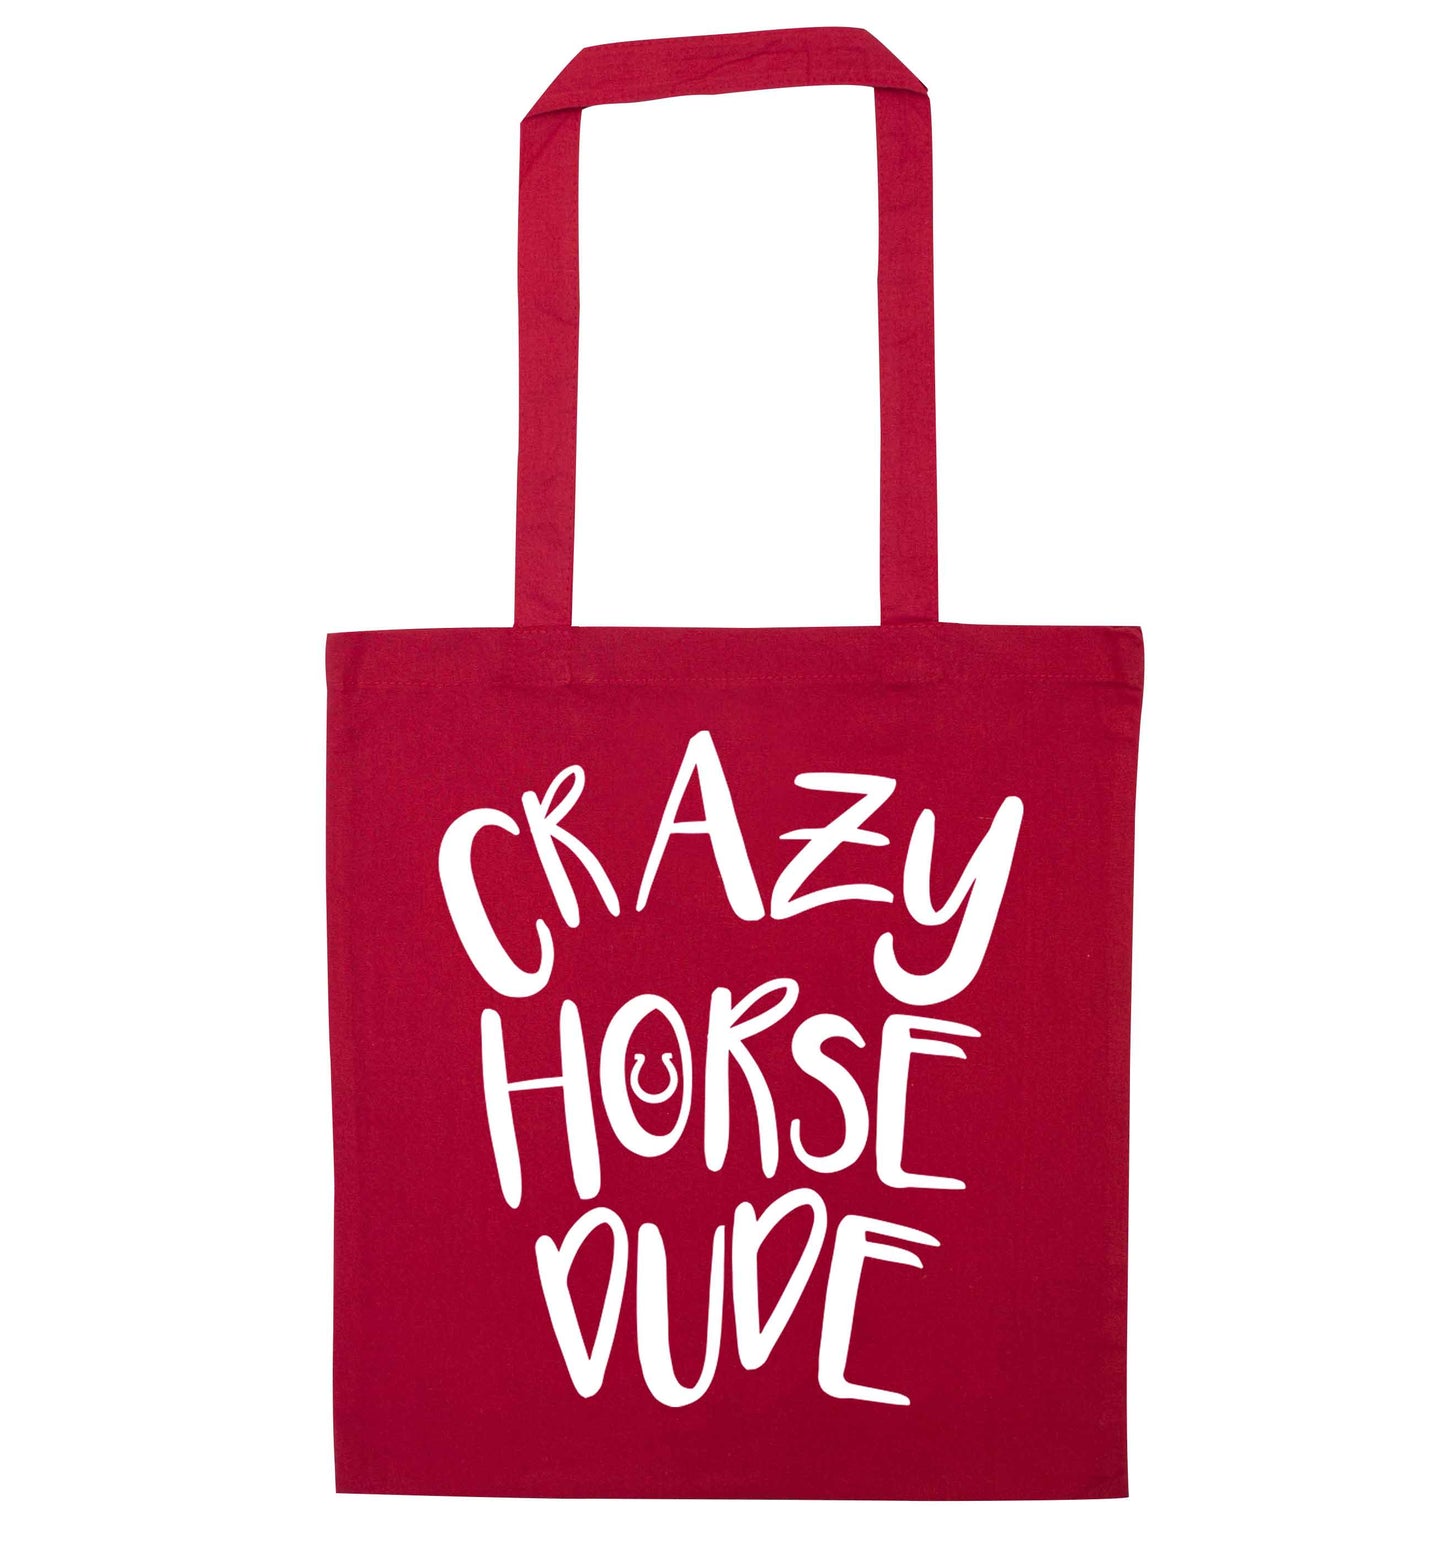 Crazy horse dude red tote bag